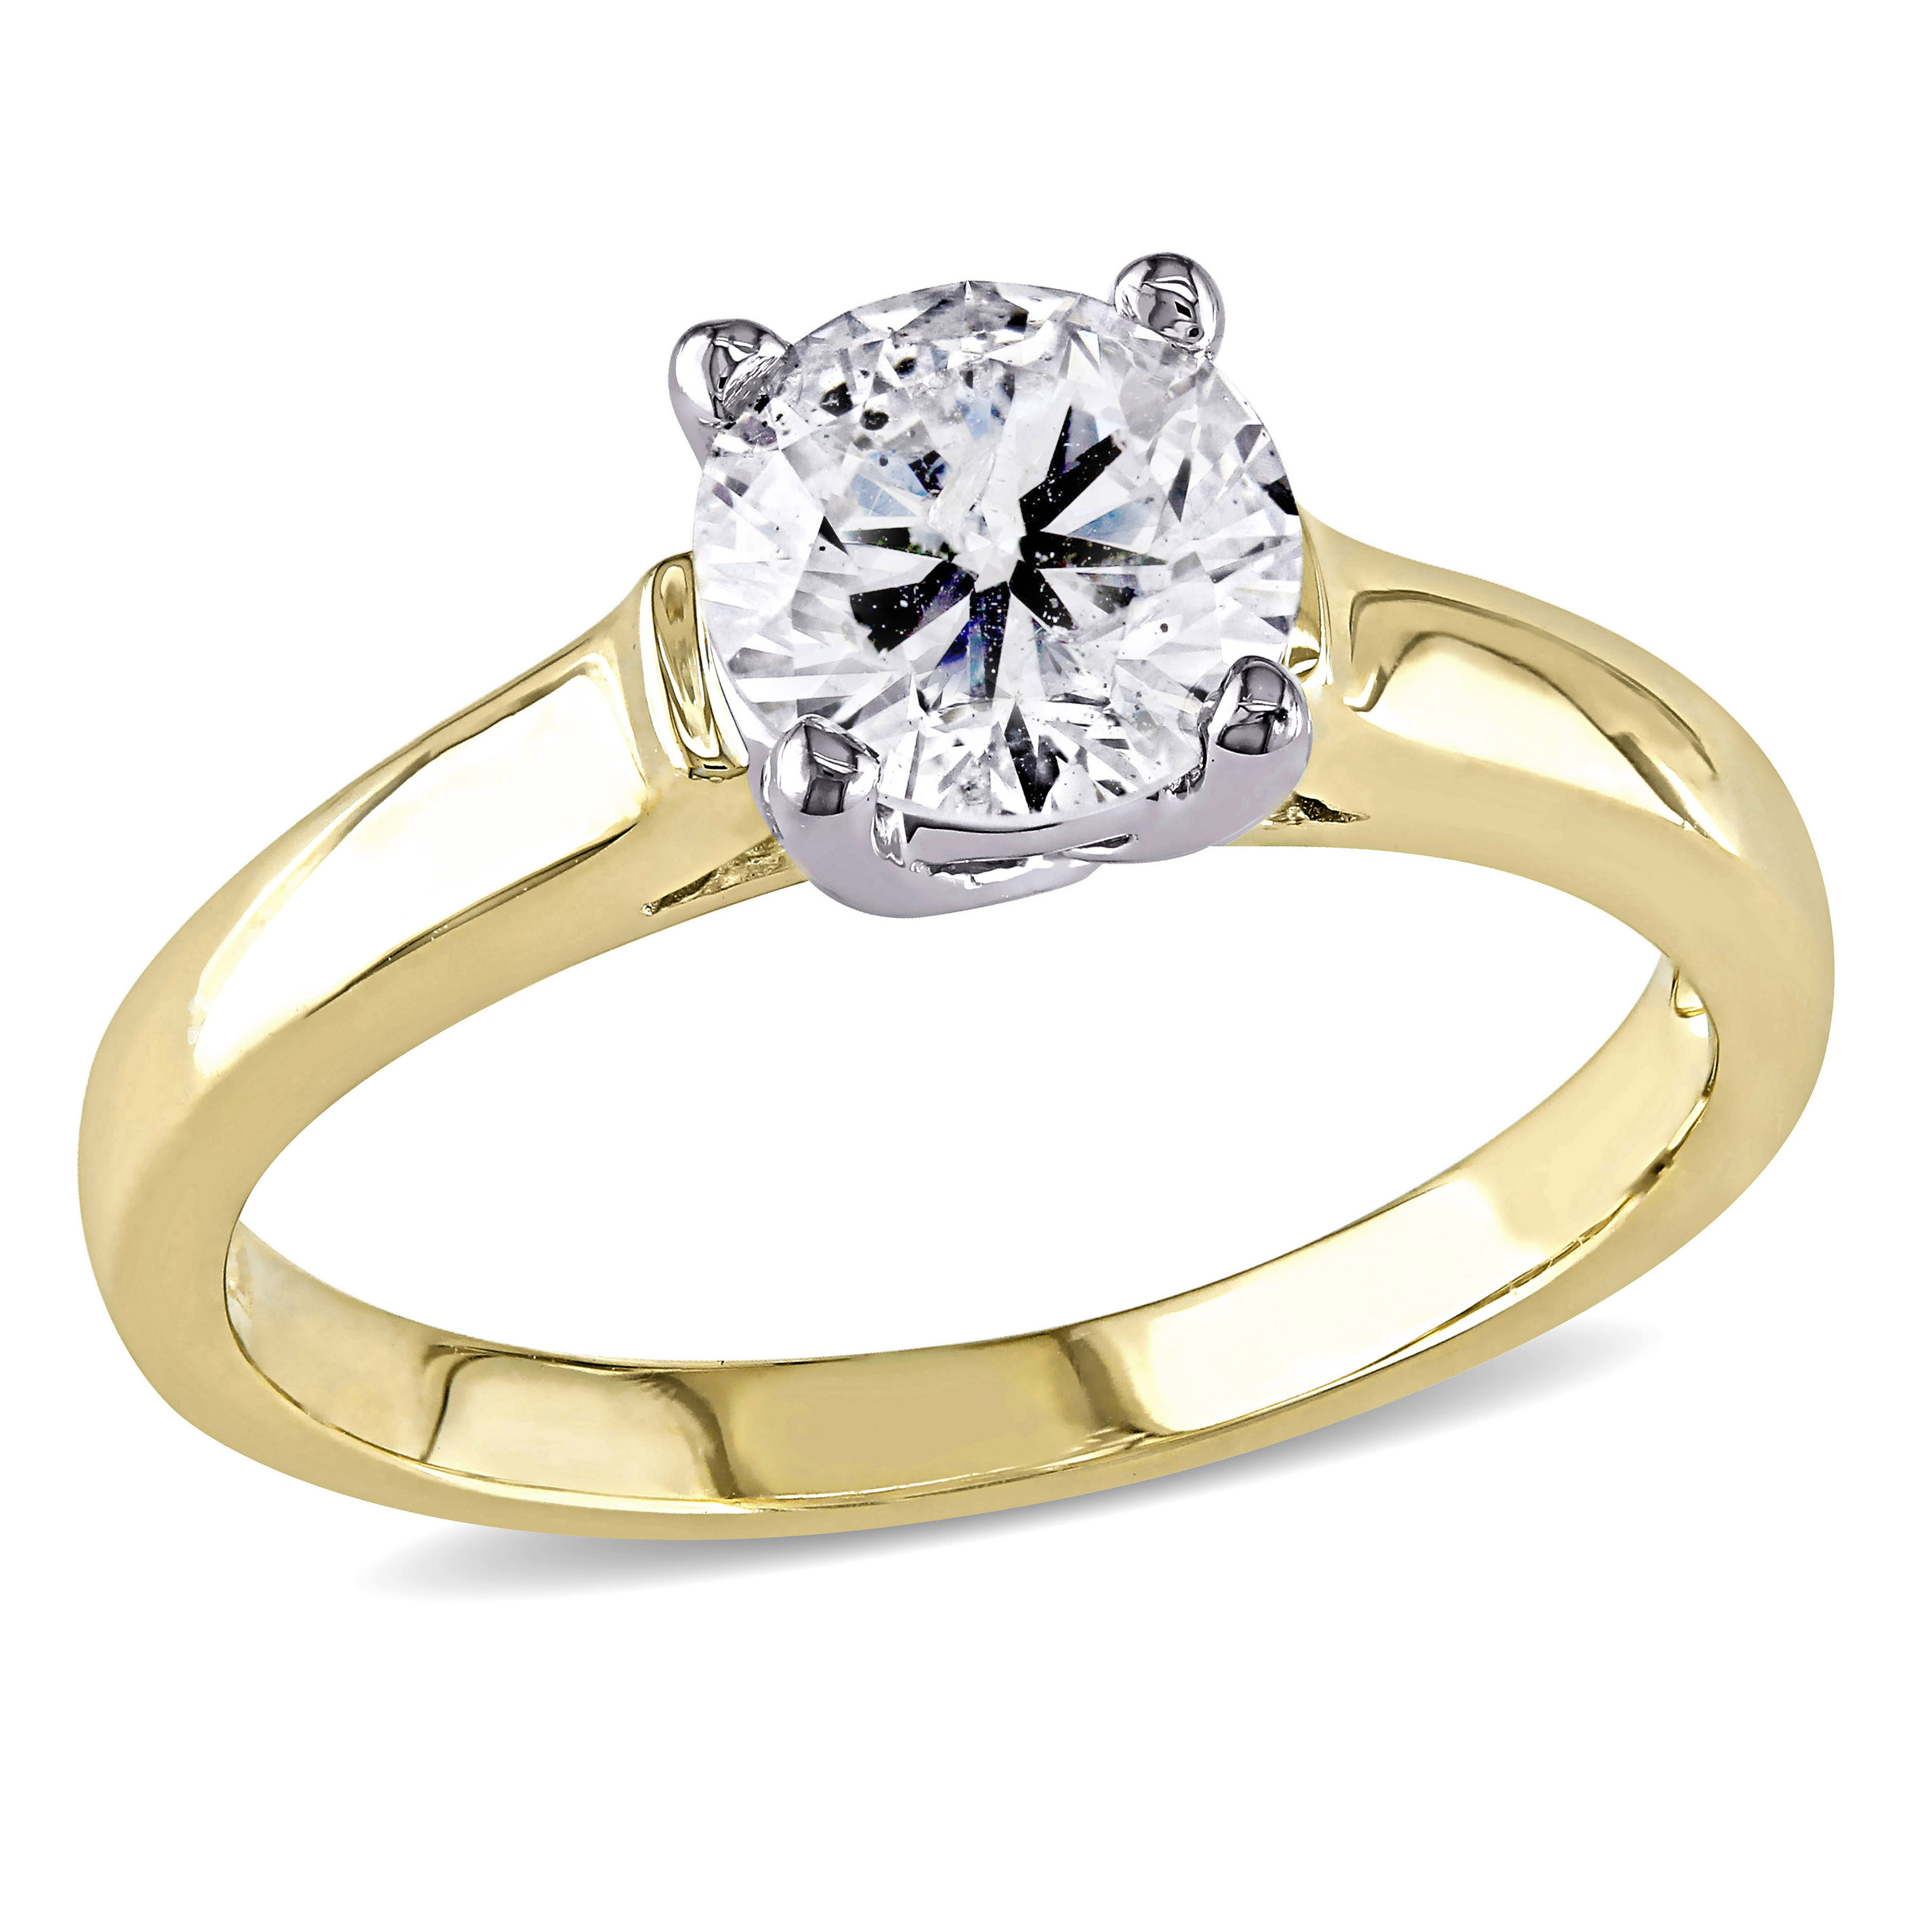 Amour 1 CT TW Diamond Solitaire Ring in 14k Yellow Gold eBay